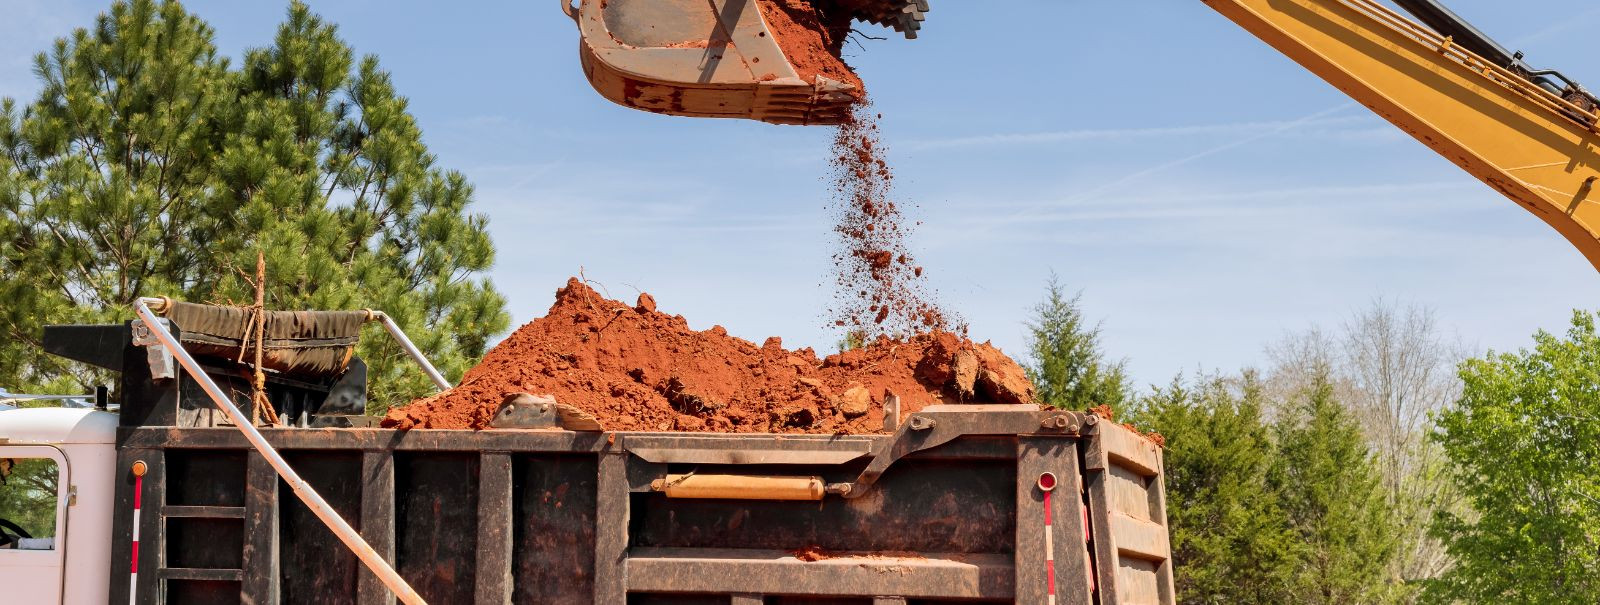 Soil work is a critical component of any construction or development project. It involves a range of activities from excavation to grading, and it requires prec